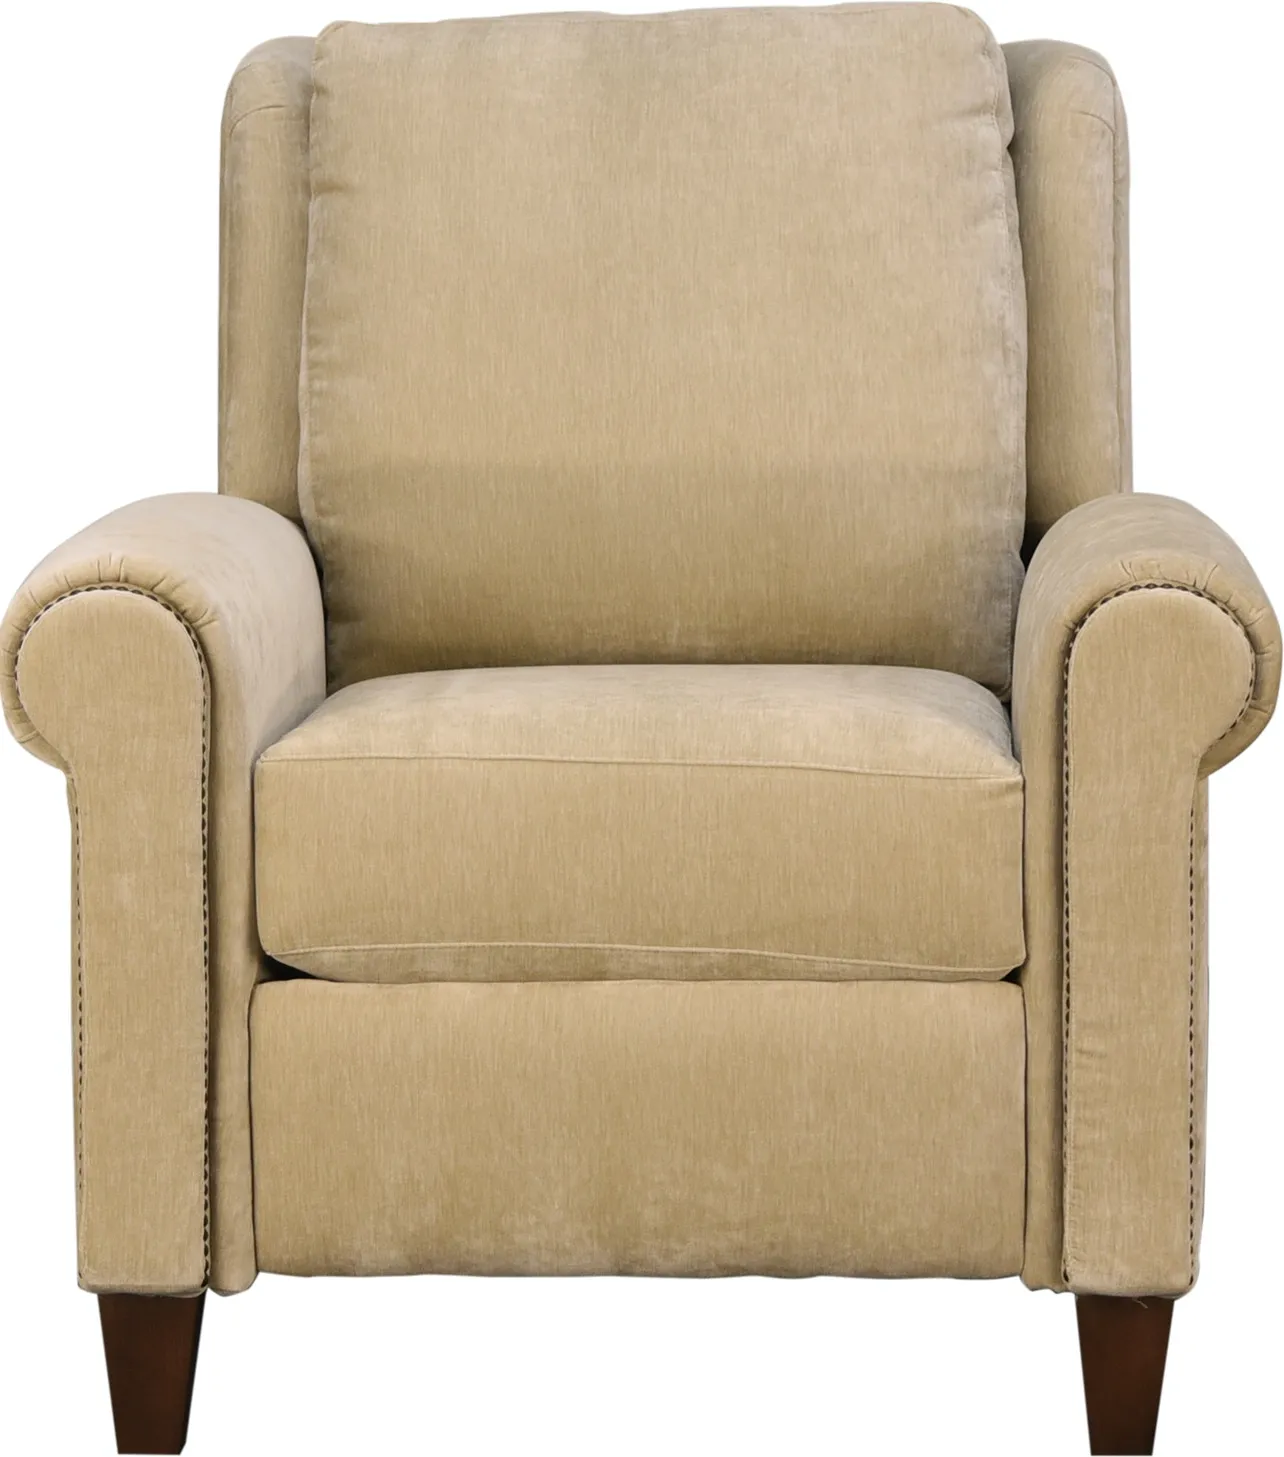 Smith Brothers 738 PRESSBACK RECLINER